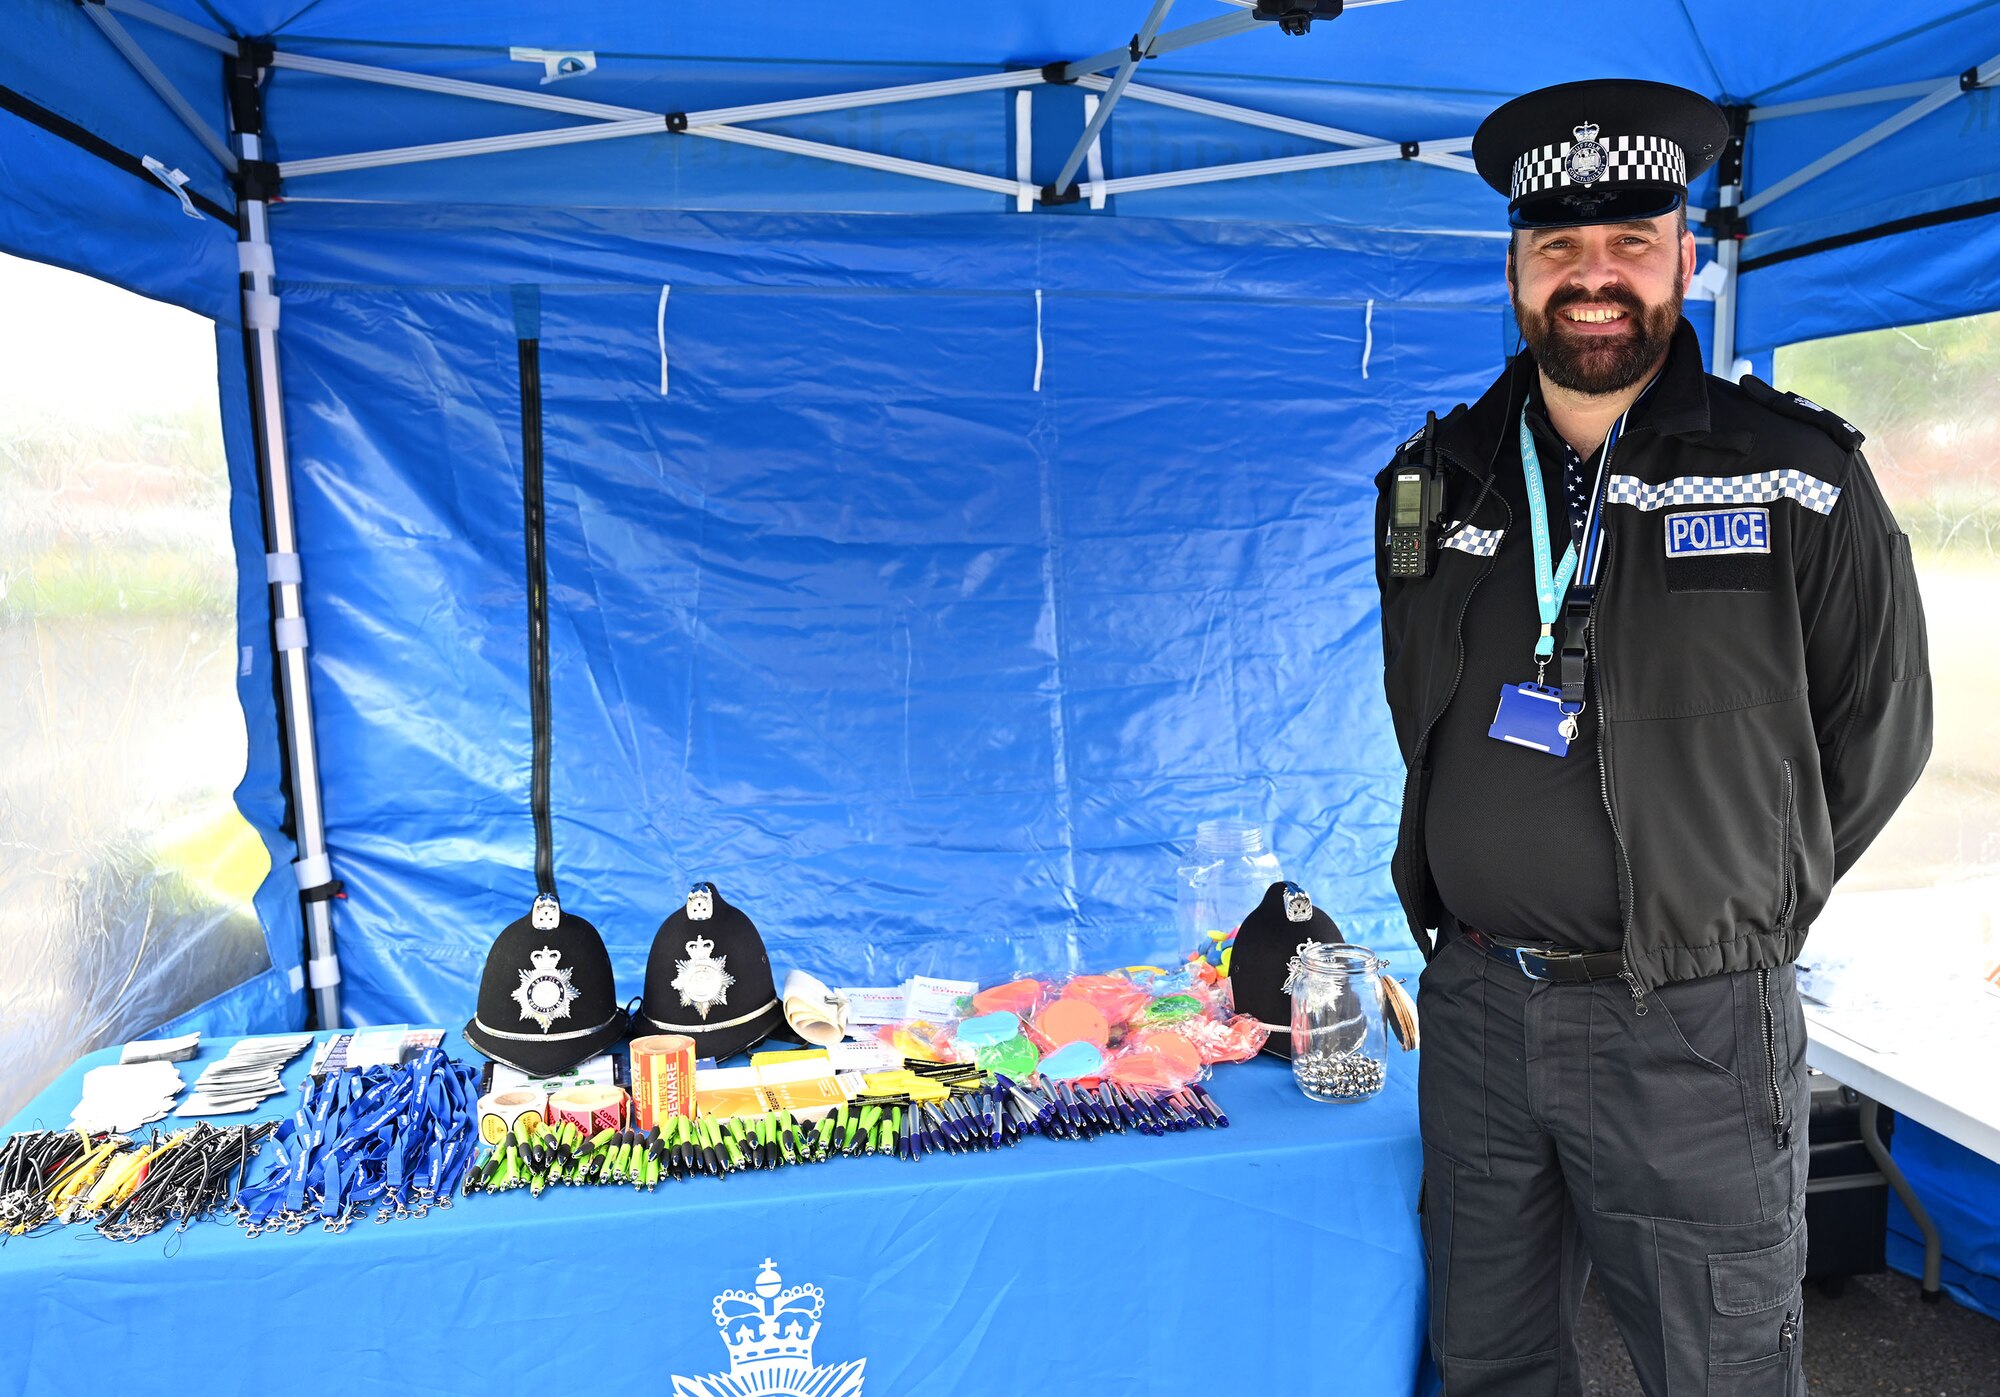 Police Constable Richard Smith, Suffolk Constabulary and Mildenhall, Newmarket and Brandon engagement officer, participates in the Police Week show-and-tell event at Royal Air Force Mildenhall, England, May 19, 2023. Police Week is held every year in May and this year is May 15 to 19. This year’s events include a ruck march, Defenders’ Challenge, “jail and bail,” and Fallen Defender memorial. (U.S. Air Force photo by Karen Abeyasekere)